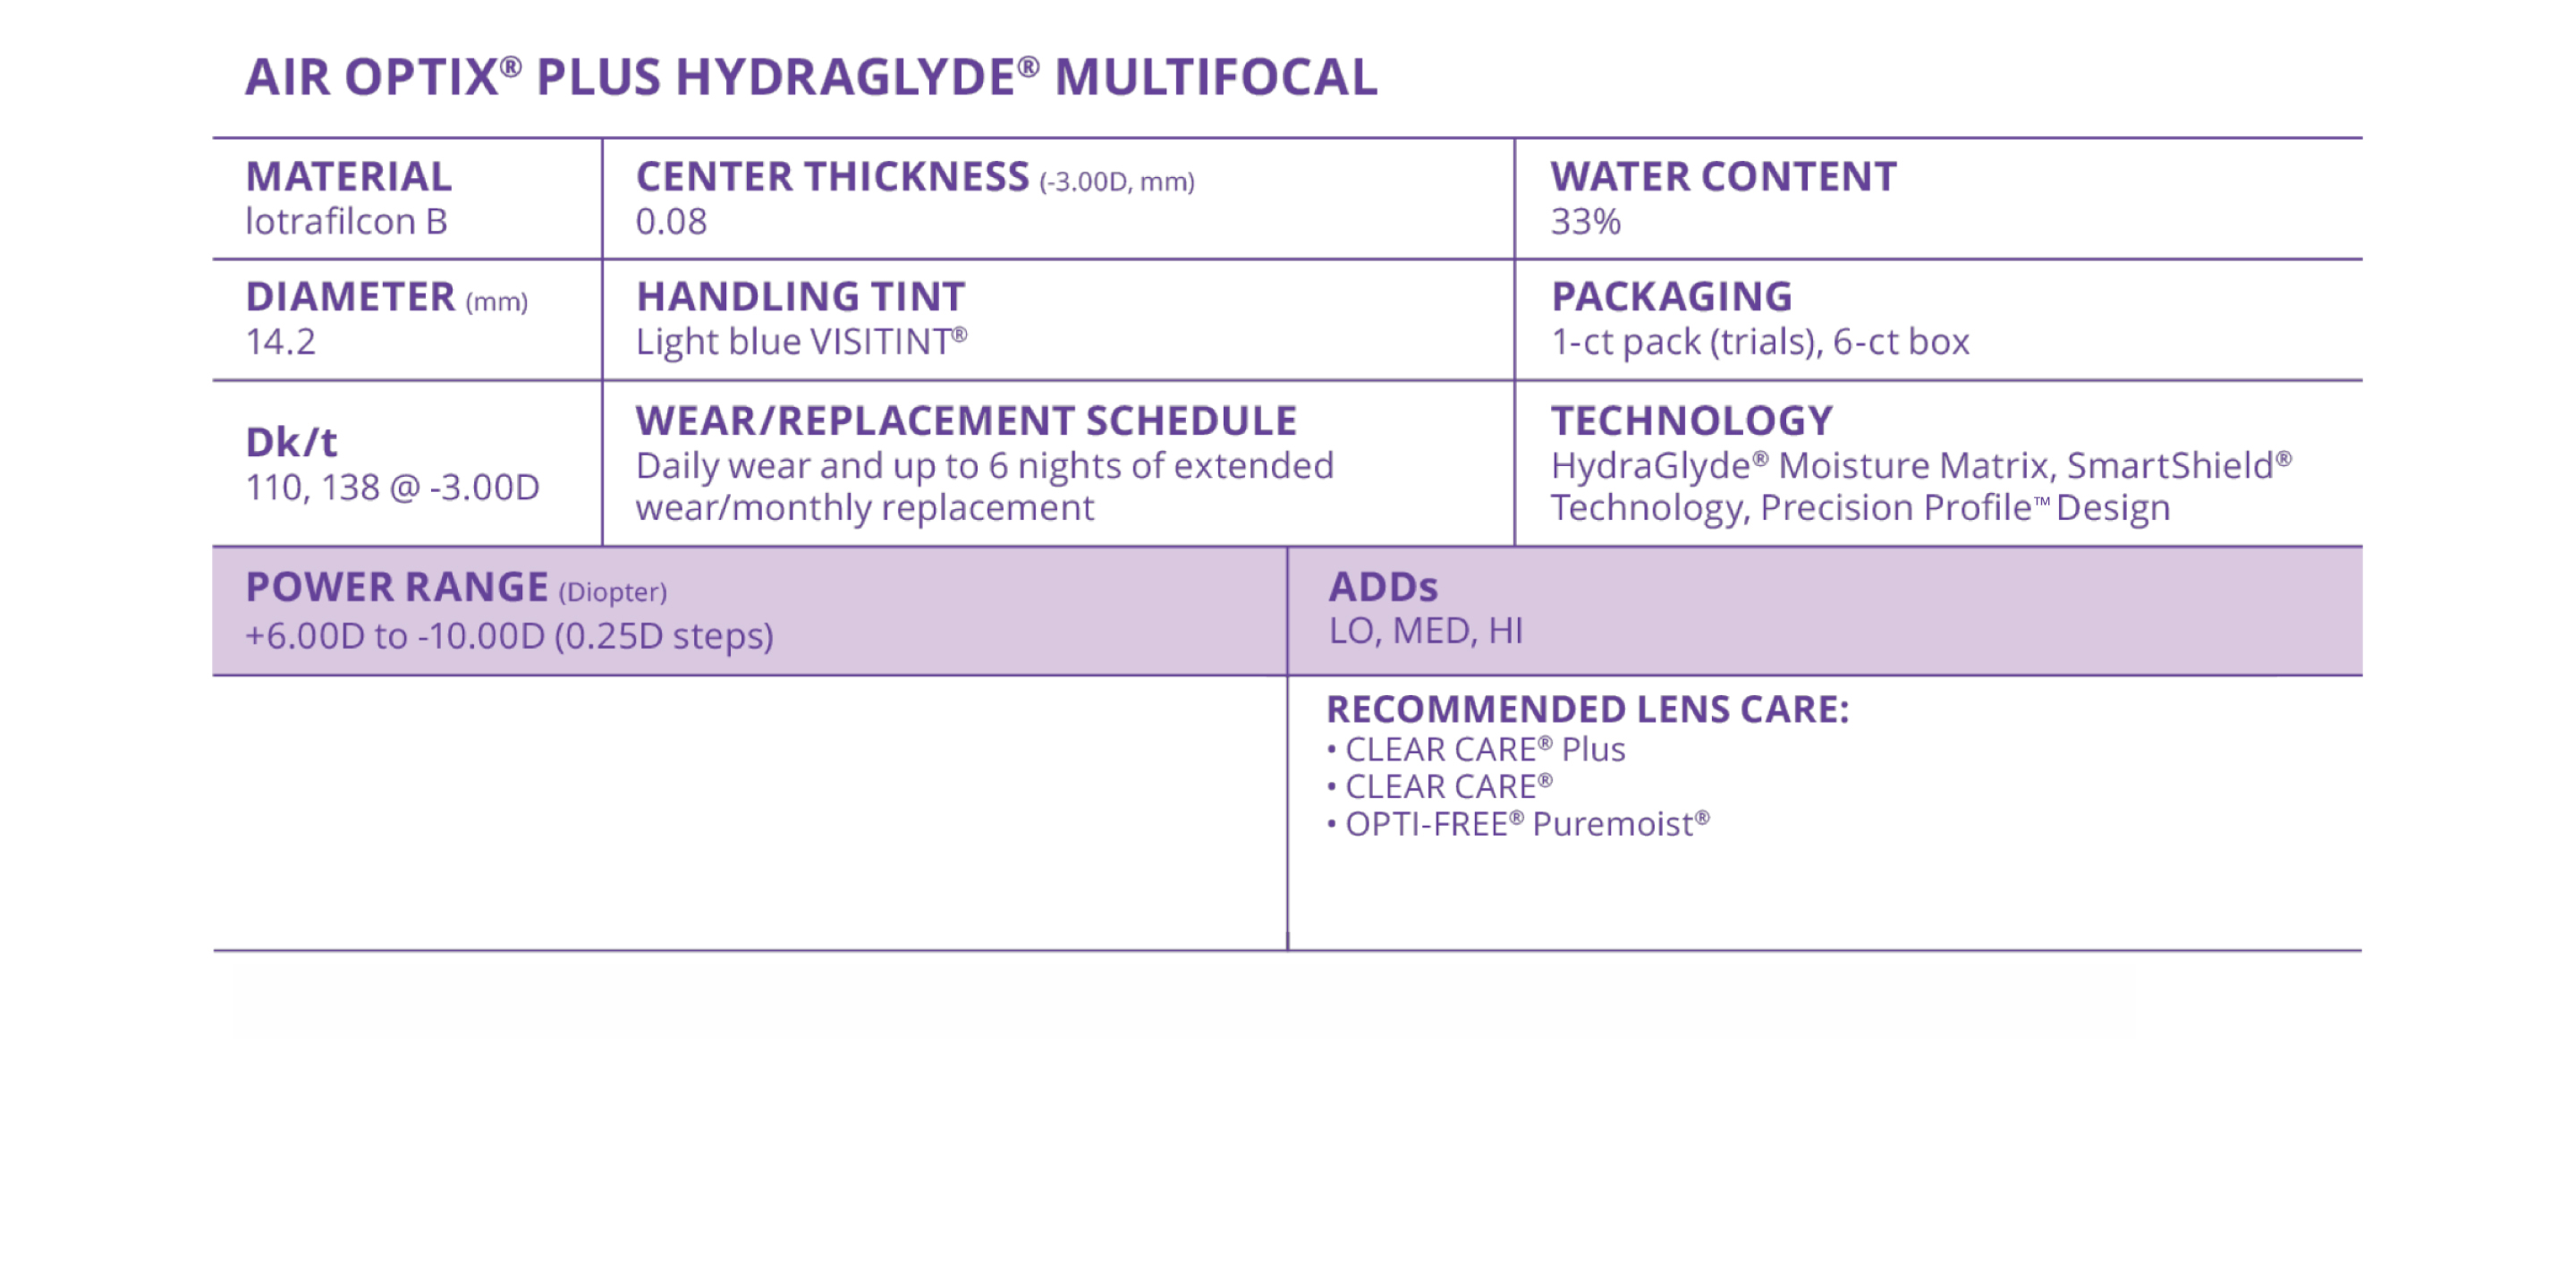 air-optix-plus-hydraglyde-multifocal-contacts-alcon-professional